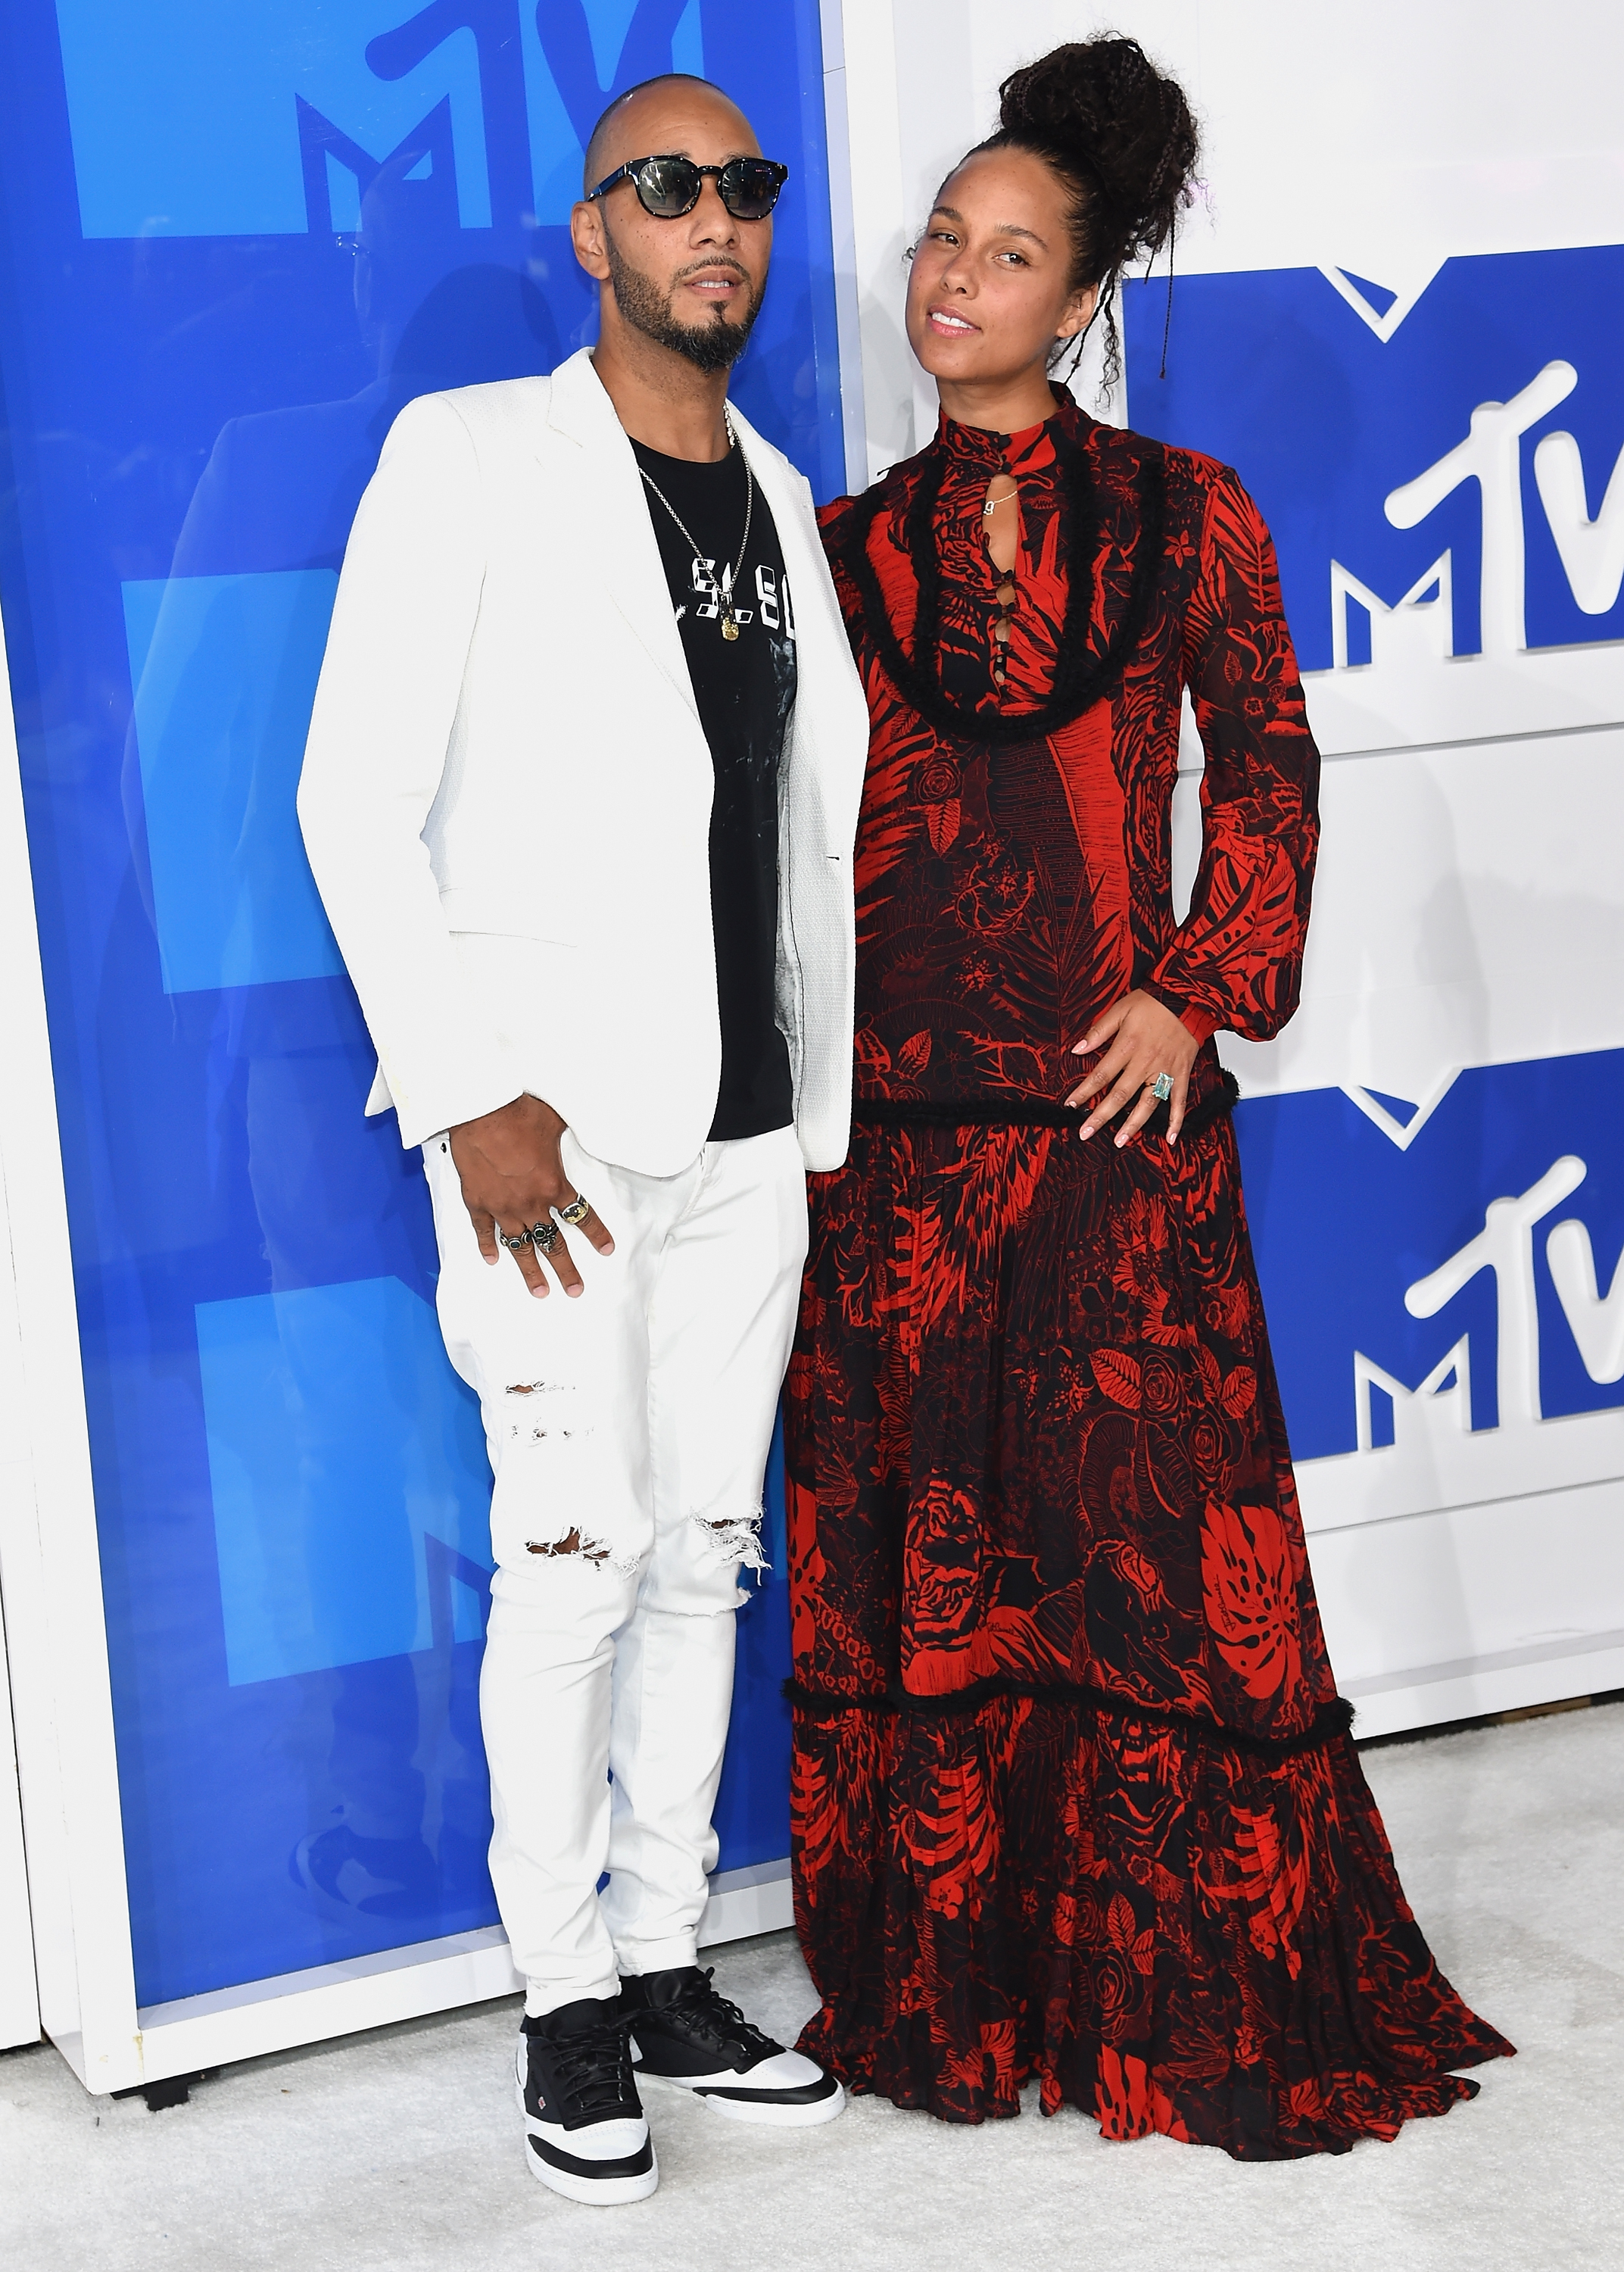 Swizz Beatz and Alicia Keys attend the 2016 MTV Video Music Awards at Madison Square Garden on Aug. 28, 2016 in New York City.